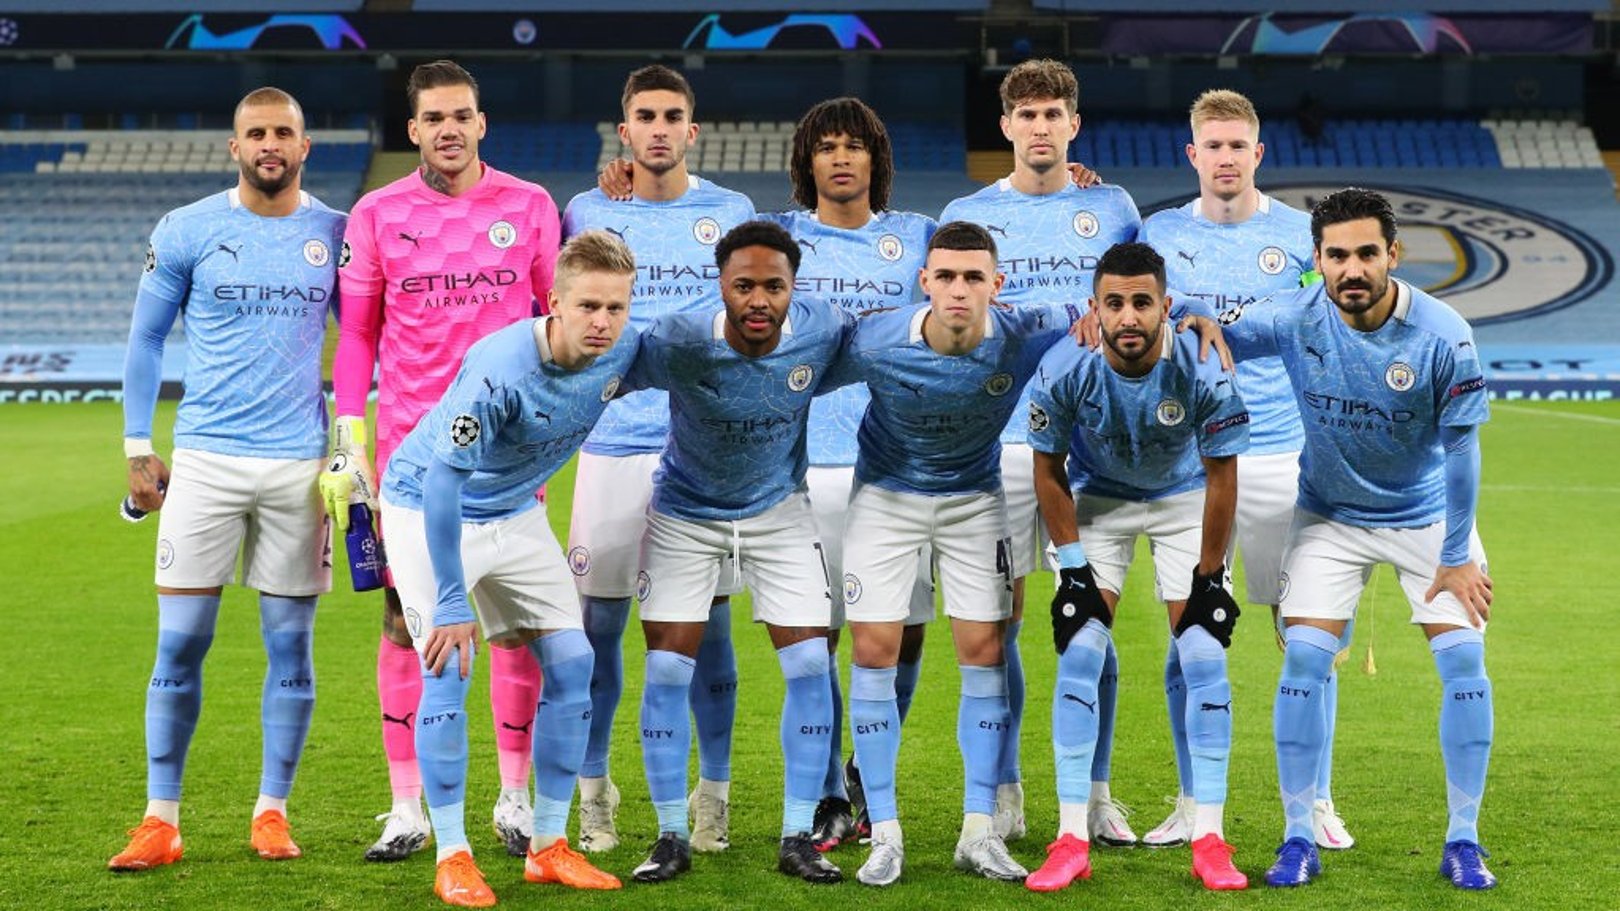 SQUAD GOALS: Our starting XI tonight 